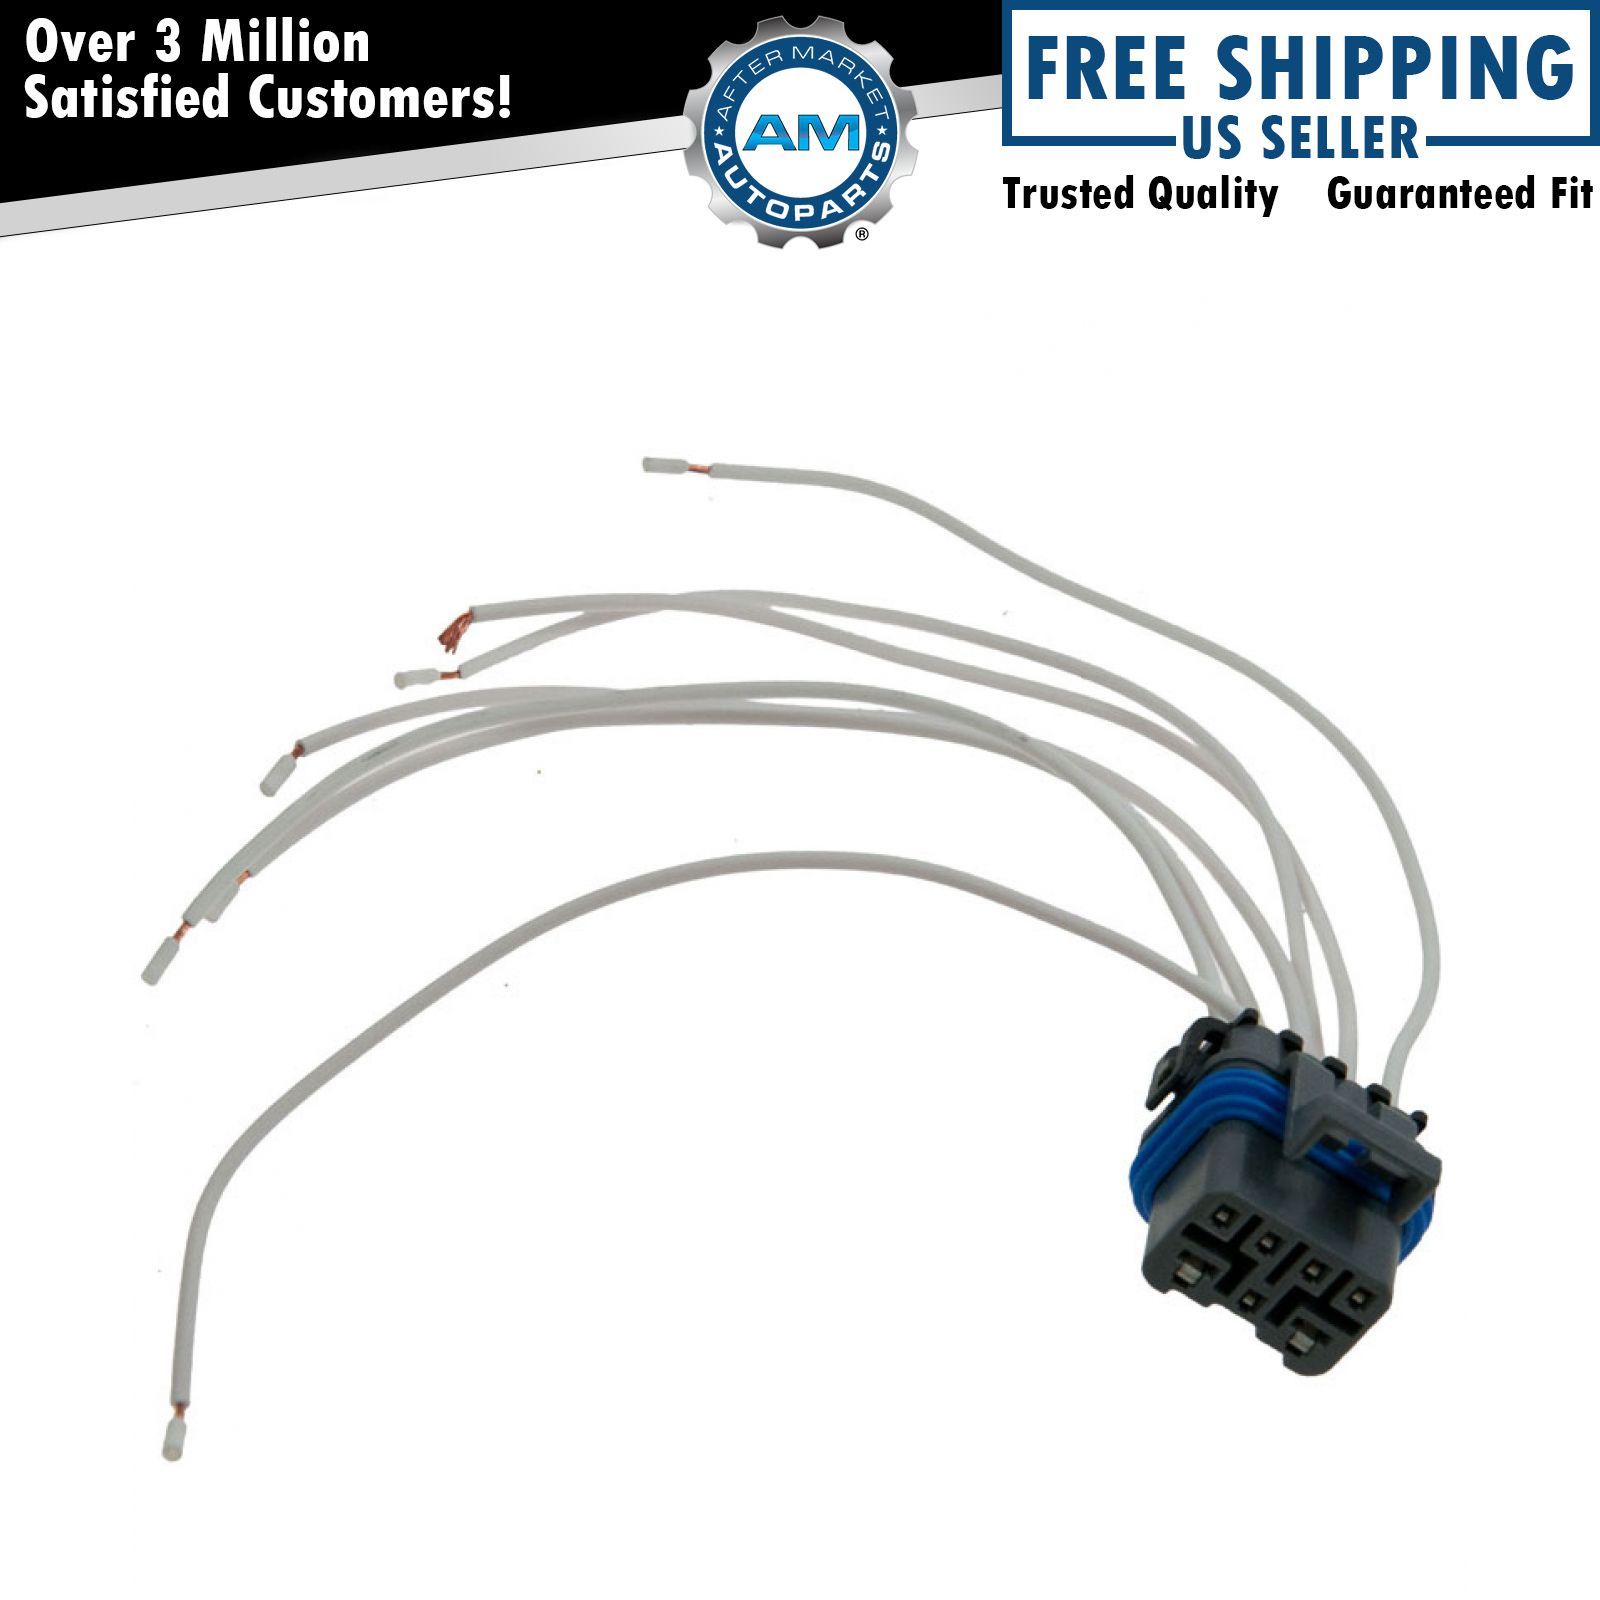 Neutral Safety Switch 4 Wire Plug for Chevy GMC Pickup Truck Van SUV